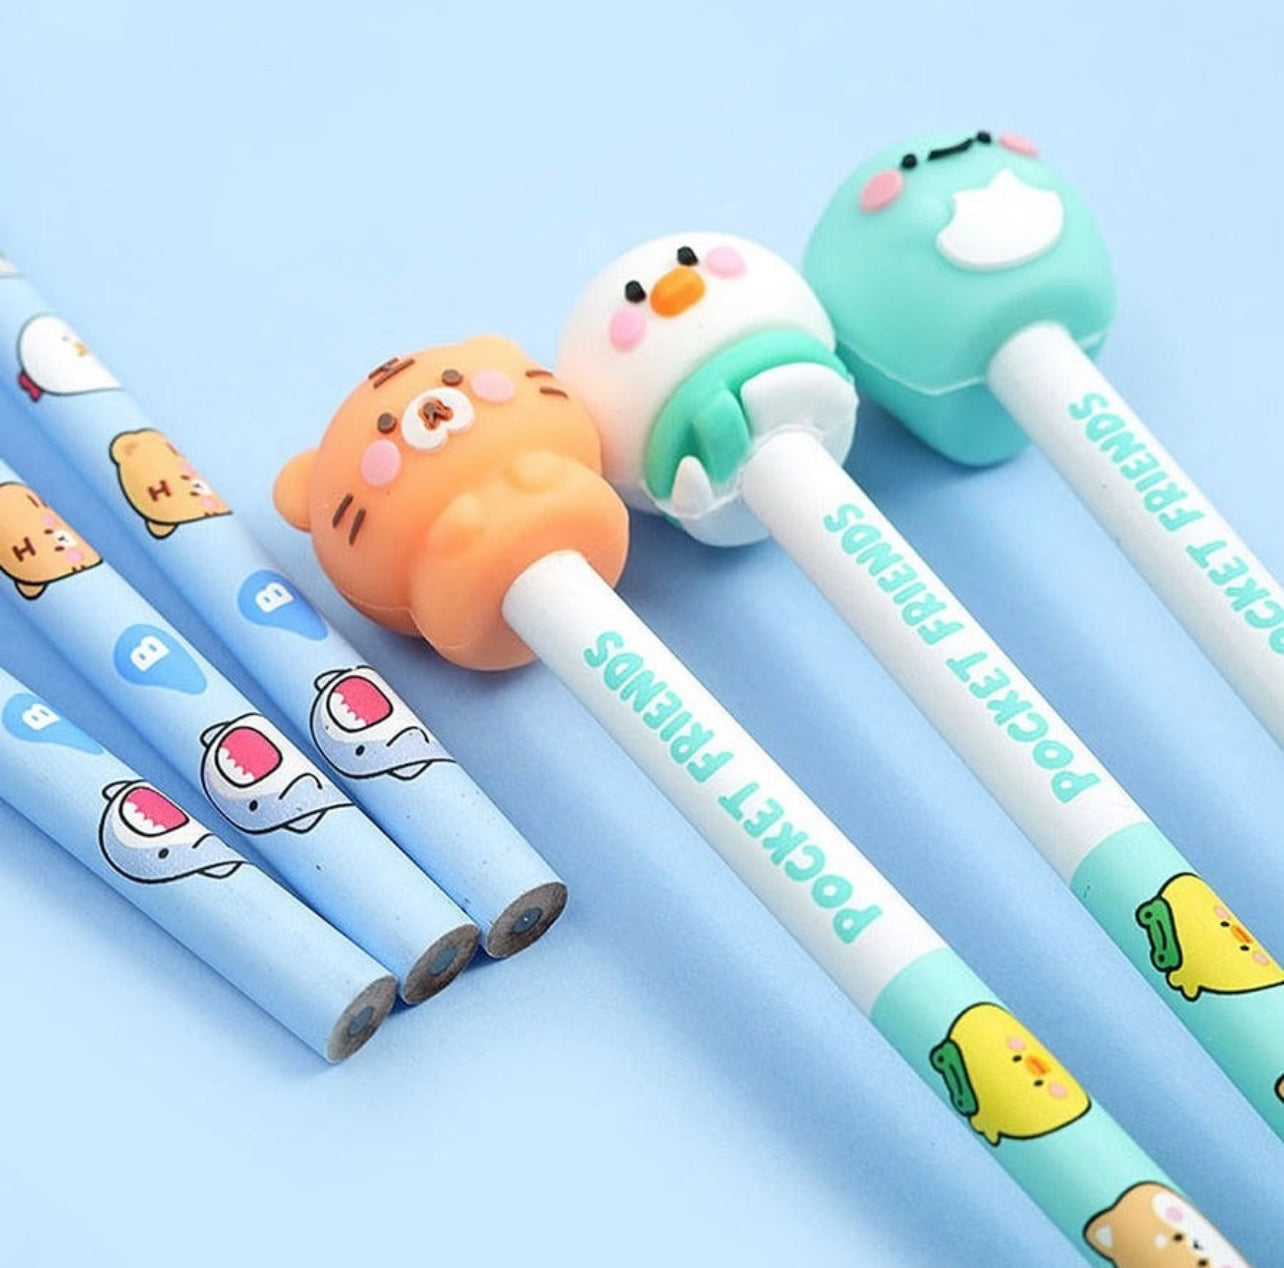 Charming Kawaii Baby Animal Design Toppers with Pencil - Set of 6